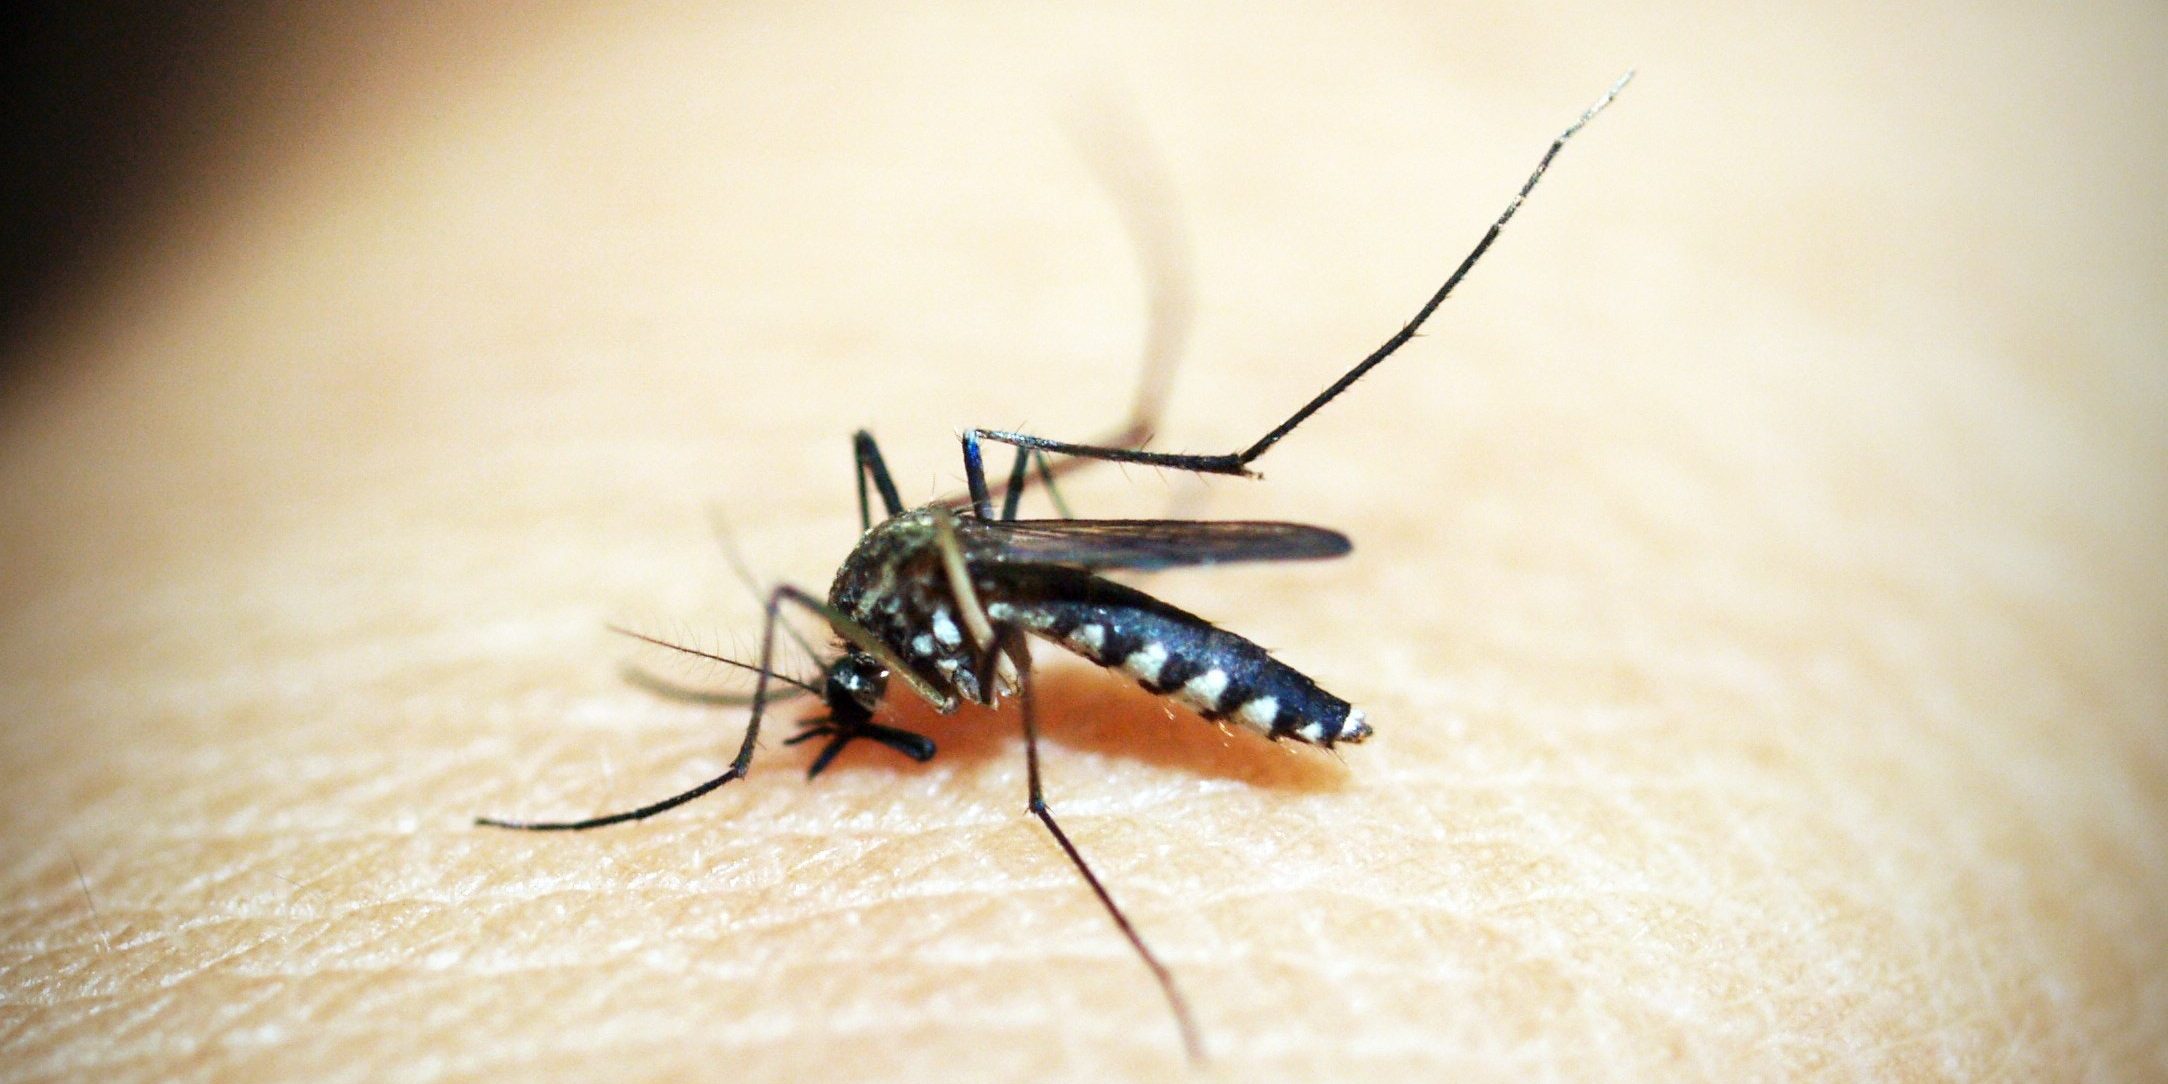 West Nile-infected mosquitos found in Hamilton for 1st time in 2022; risk level upgraded